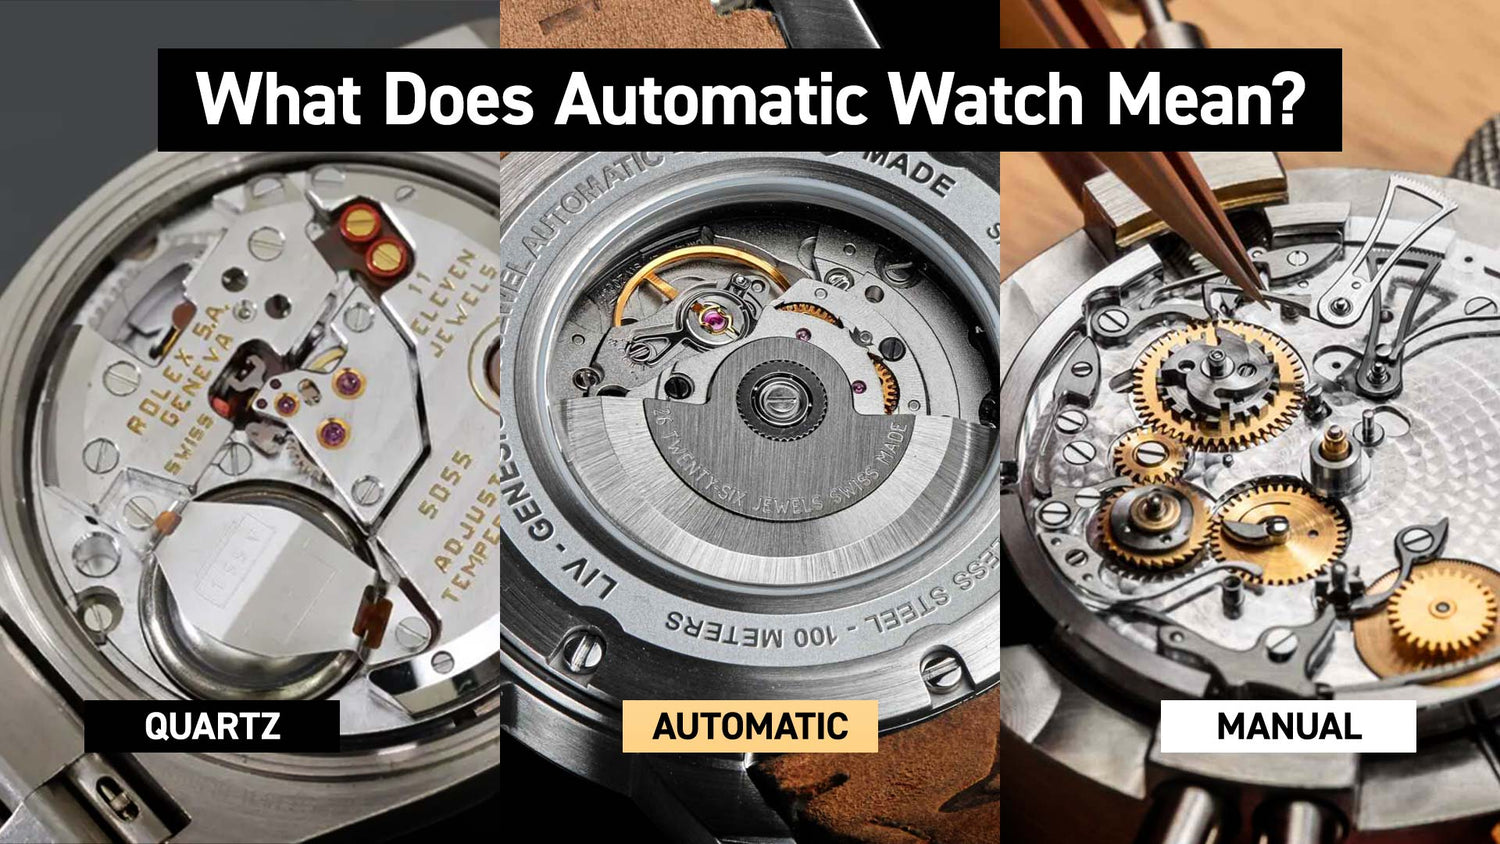 What Does Automatic Watch Mean?